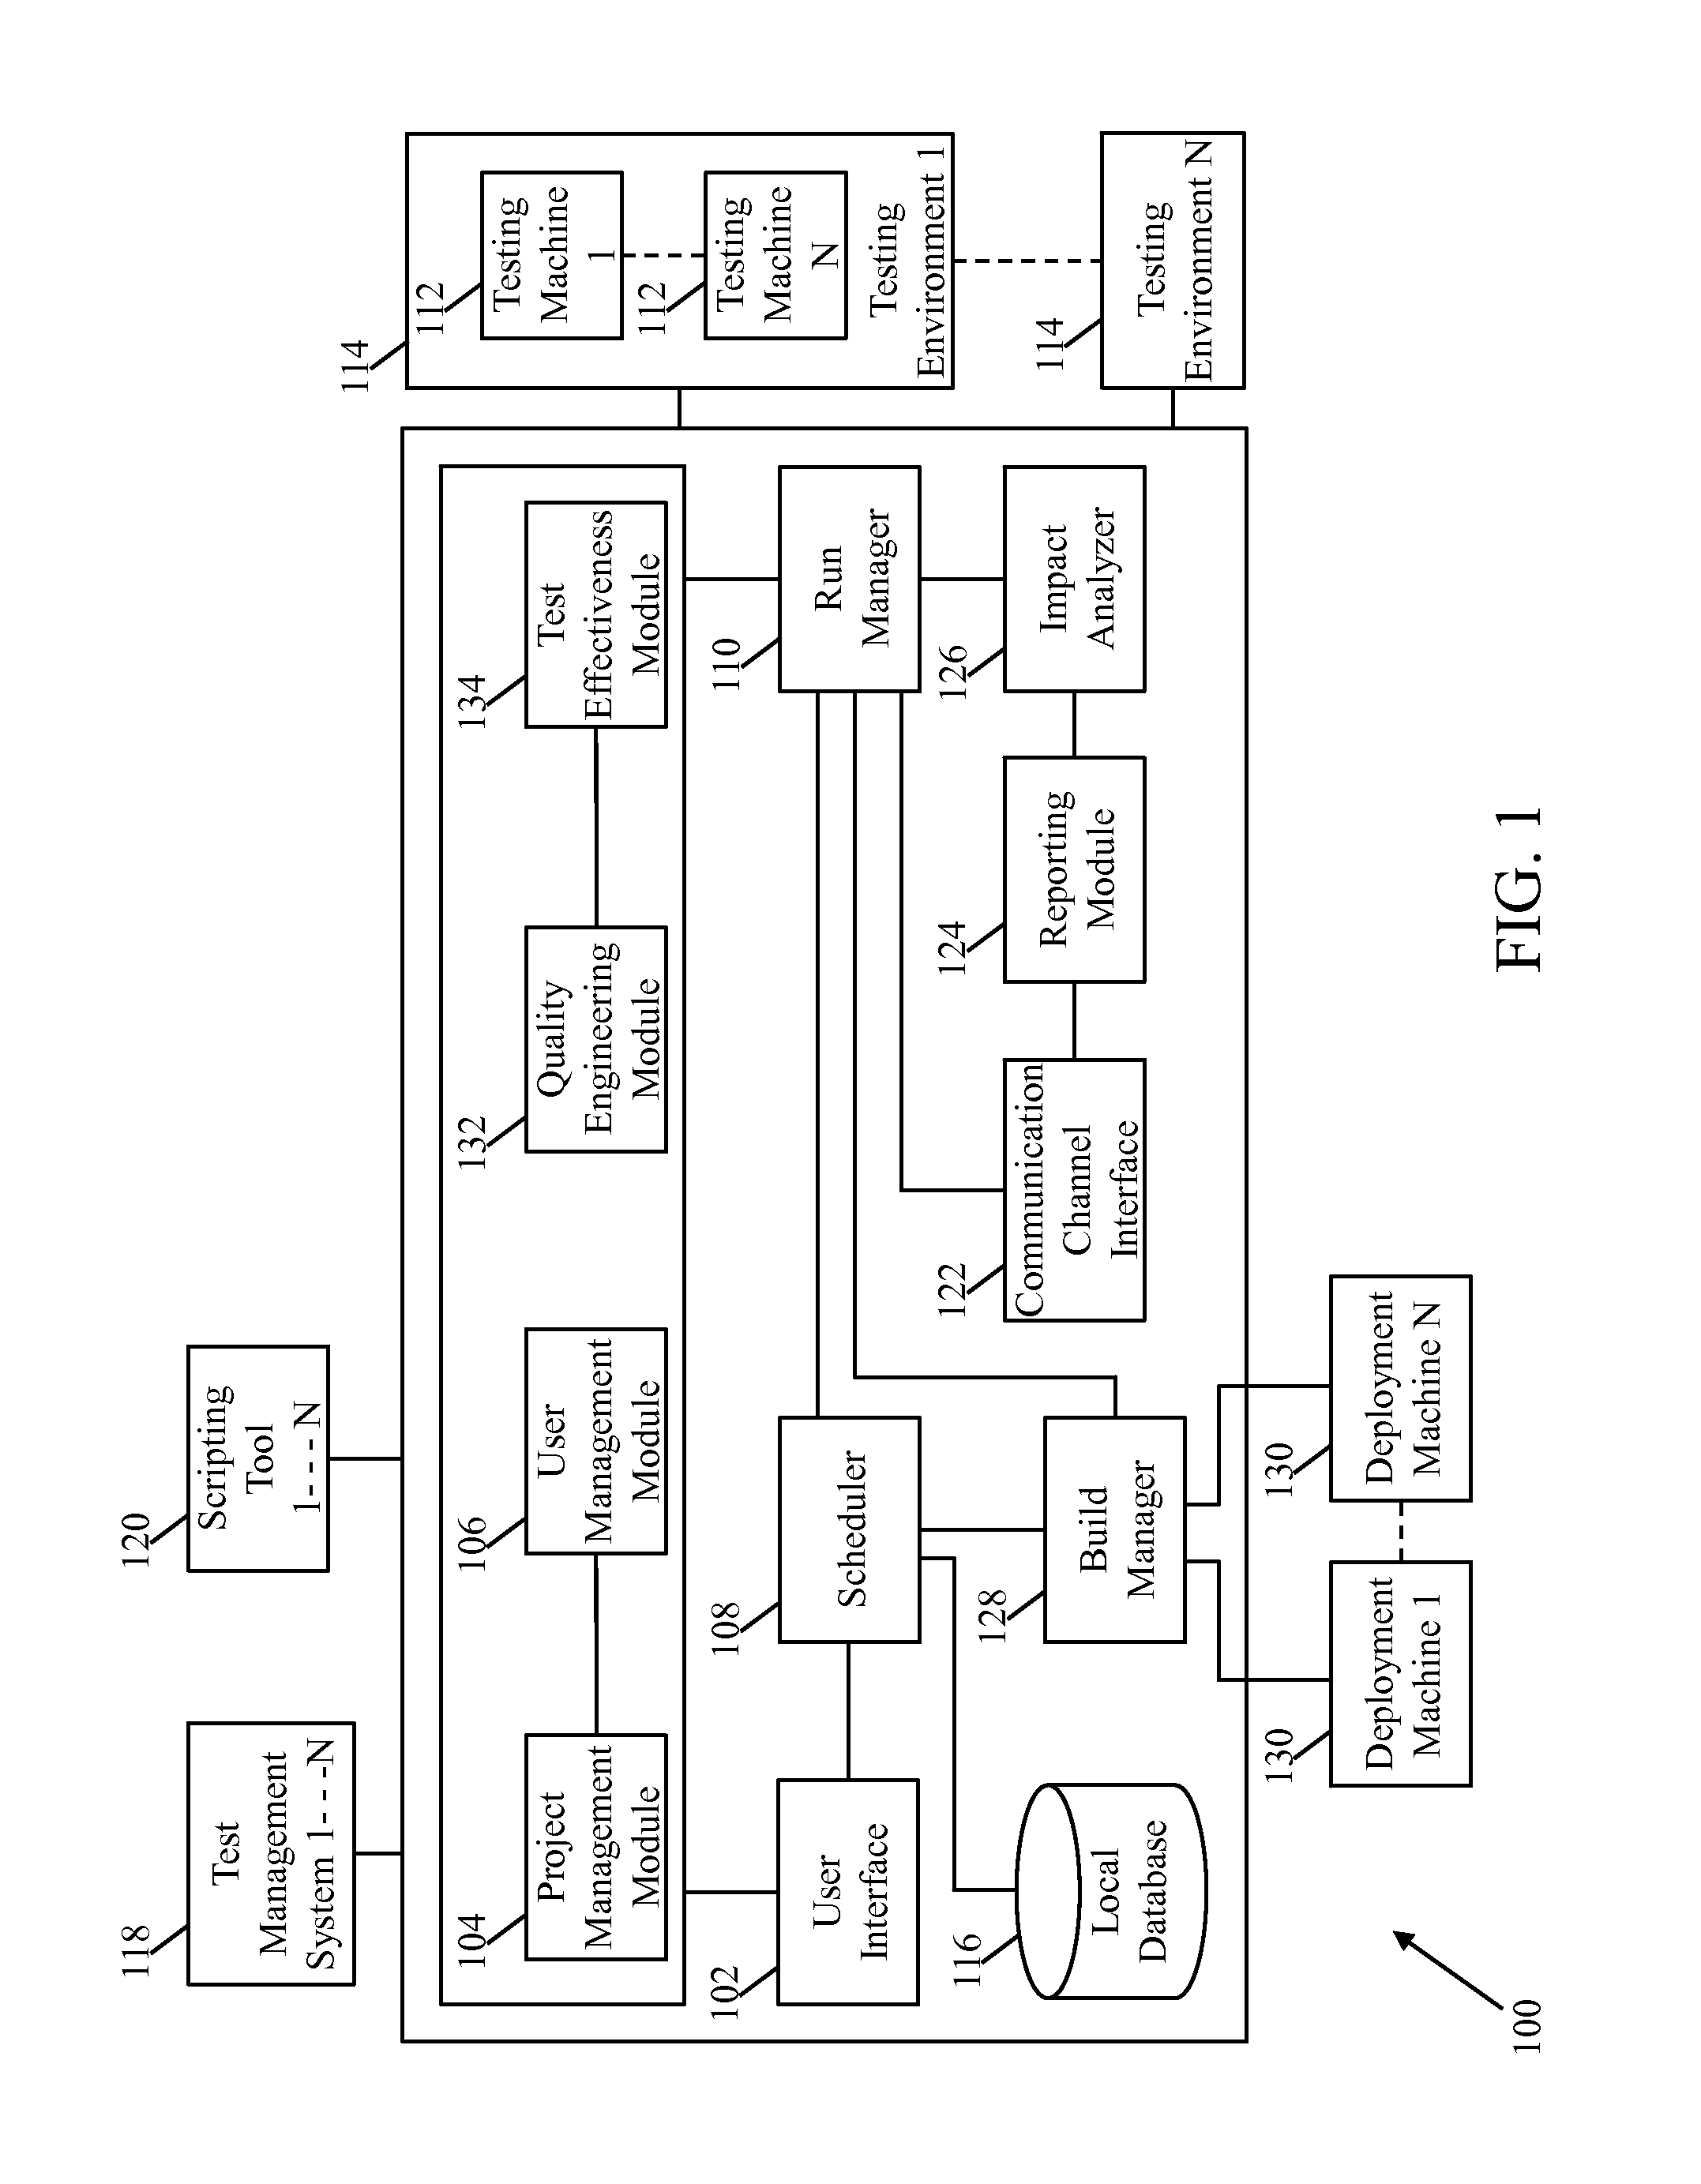 System and method for automating build deployment and testing processes